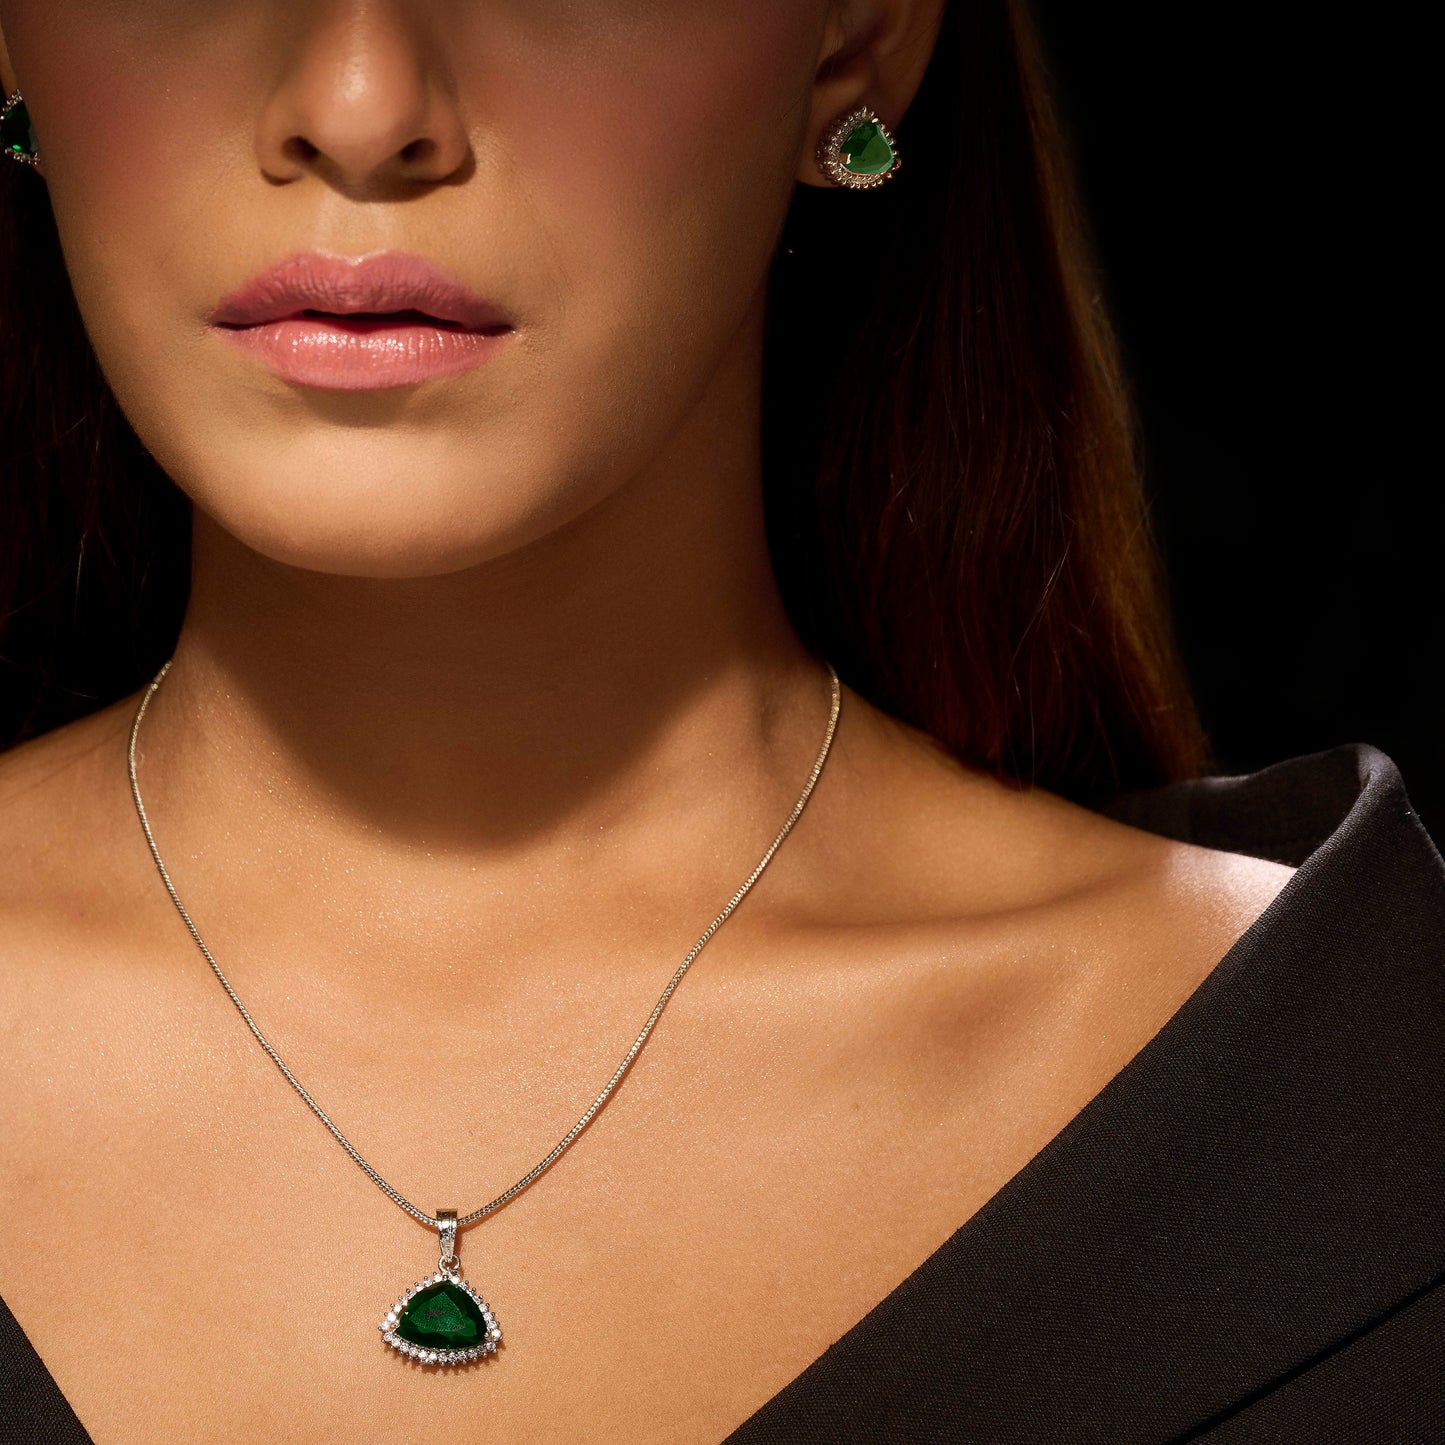 Abstract Emerald and Diamonds studded necklace with Matching Studs Earrings